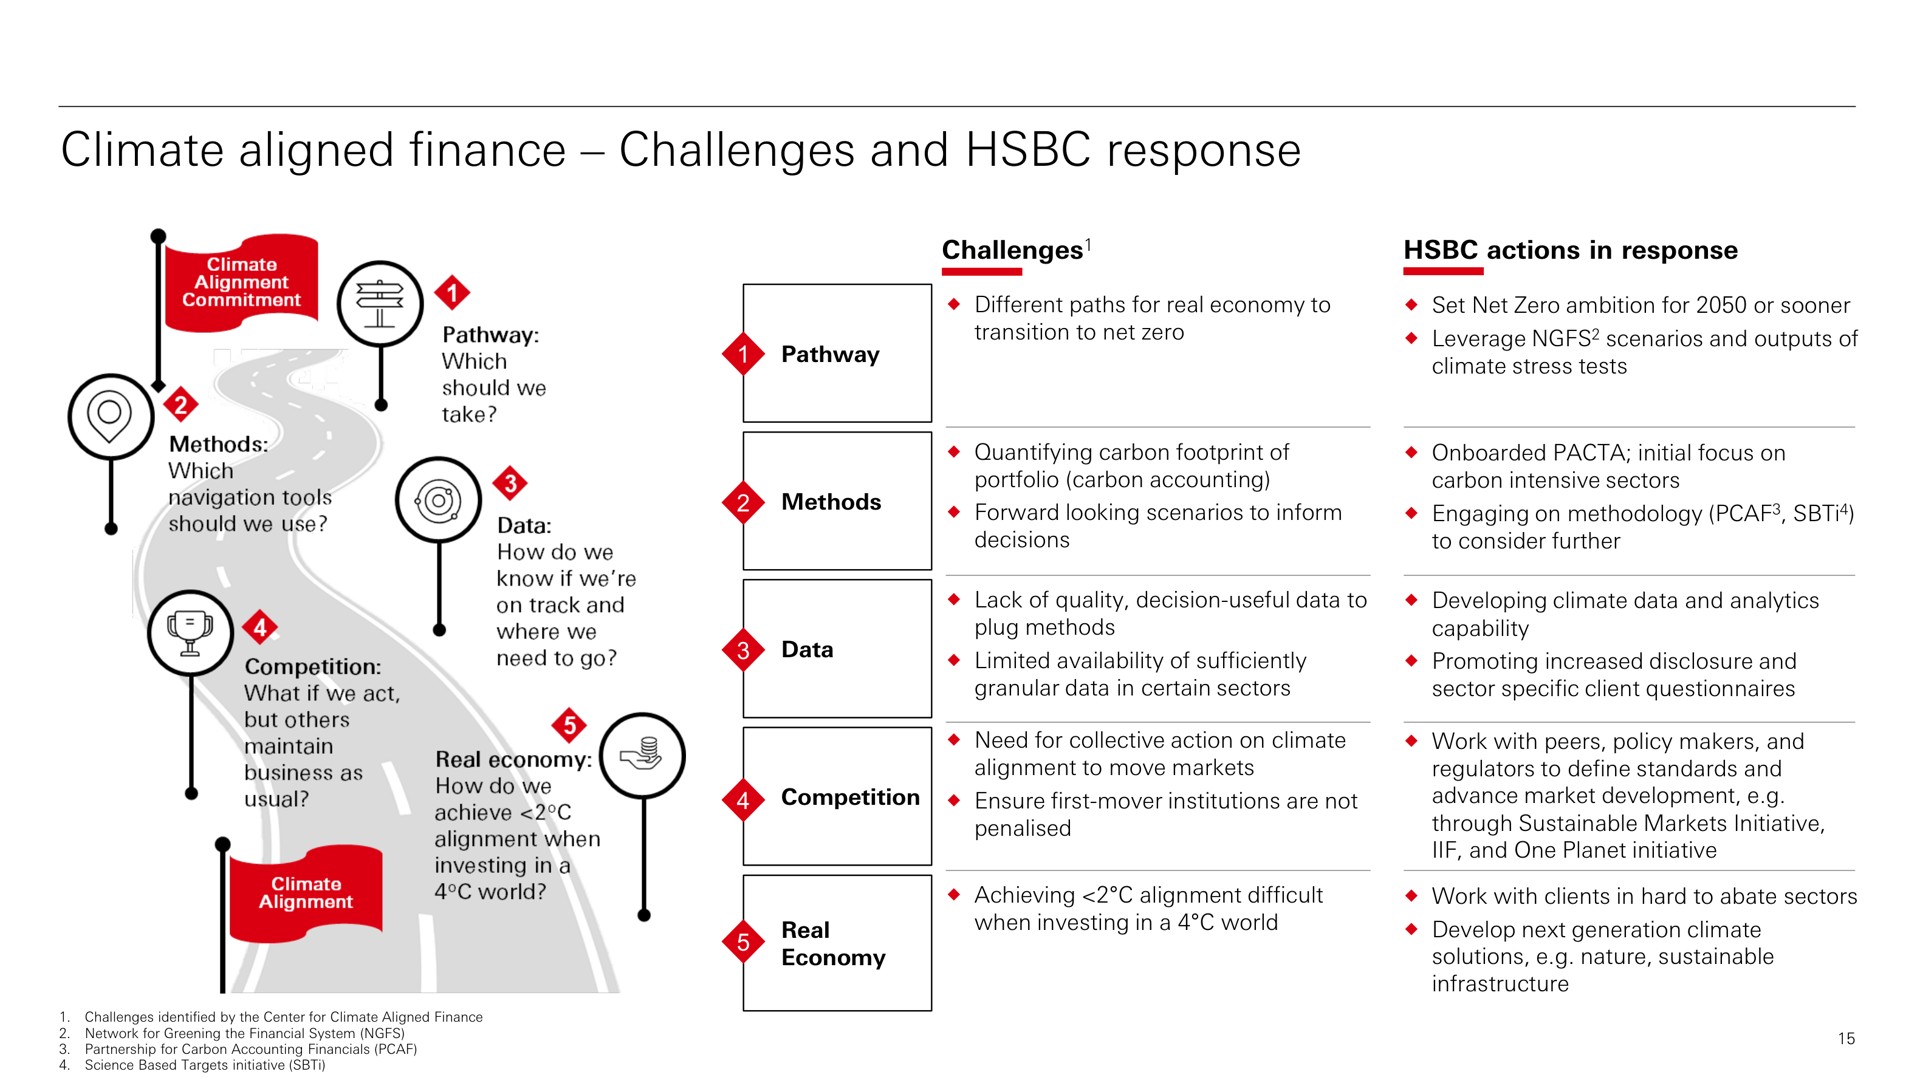 climate aligned finance challenges and response | HSBC